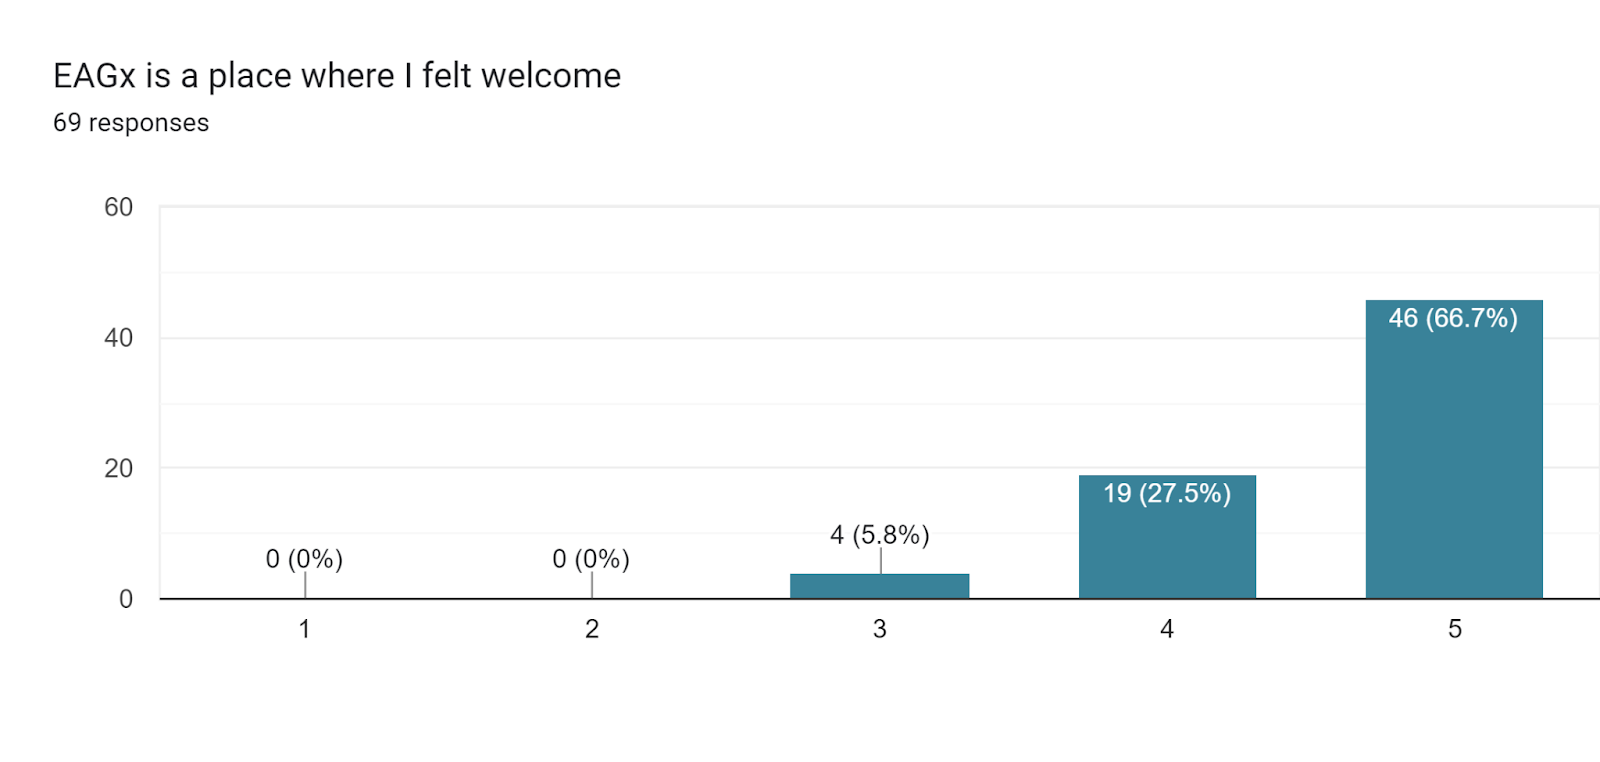 Forms response chart. Question title: EAGx is a place where I felt welcome. Number of responses: 69 responses.